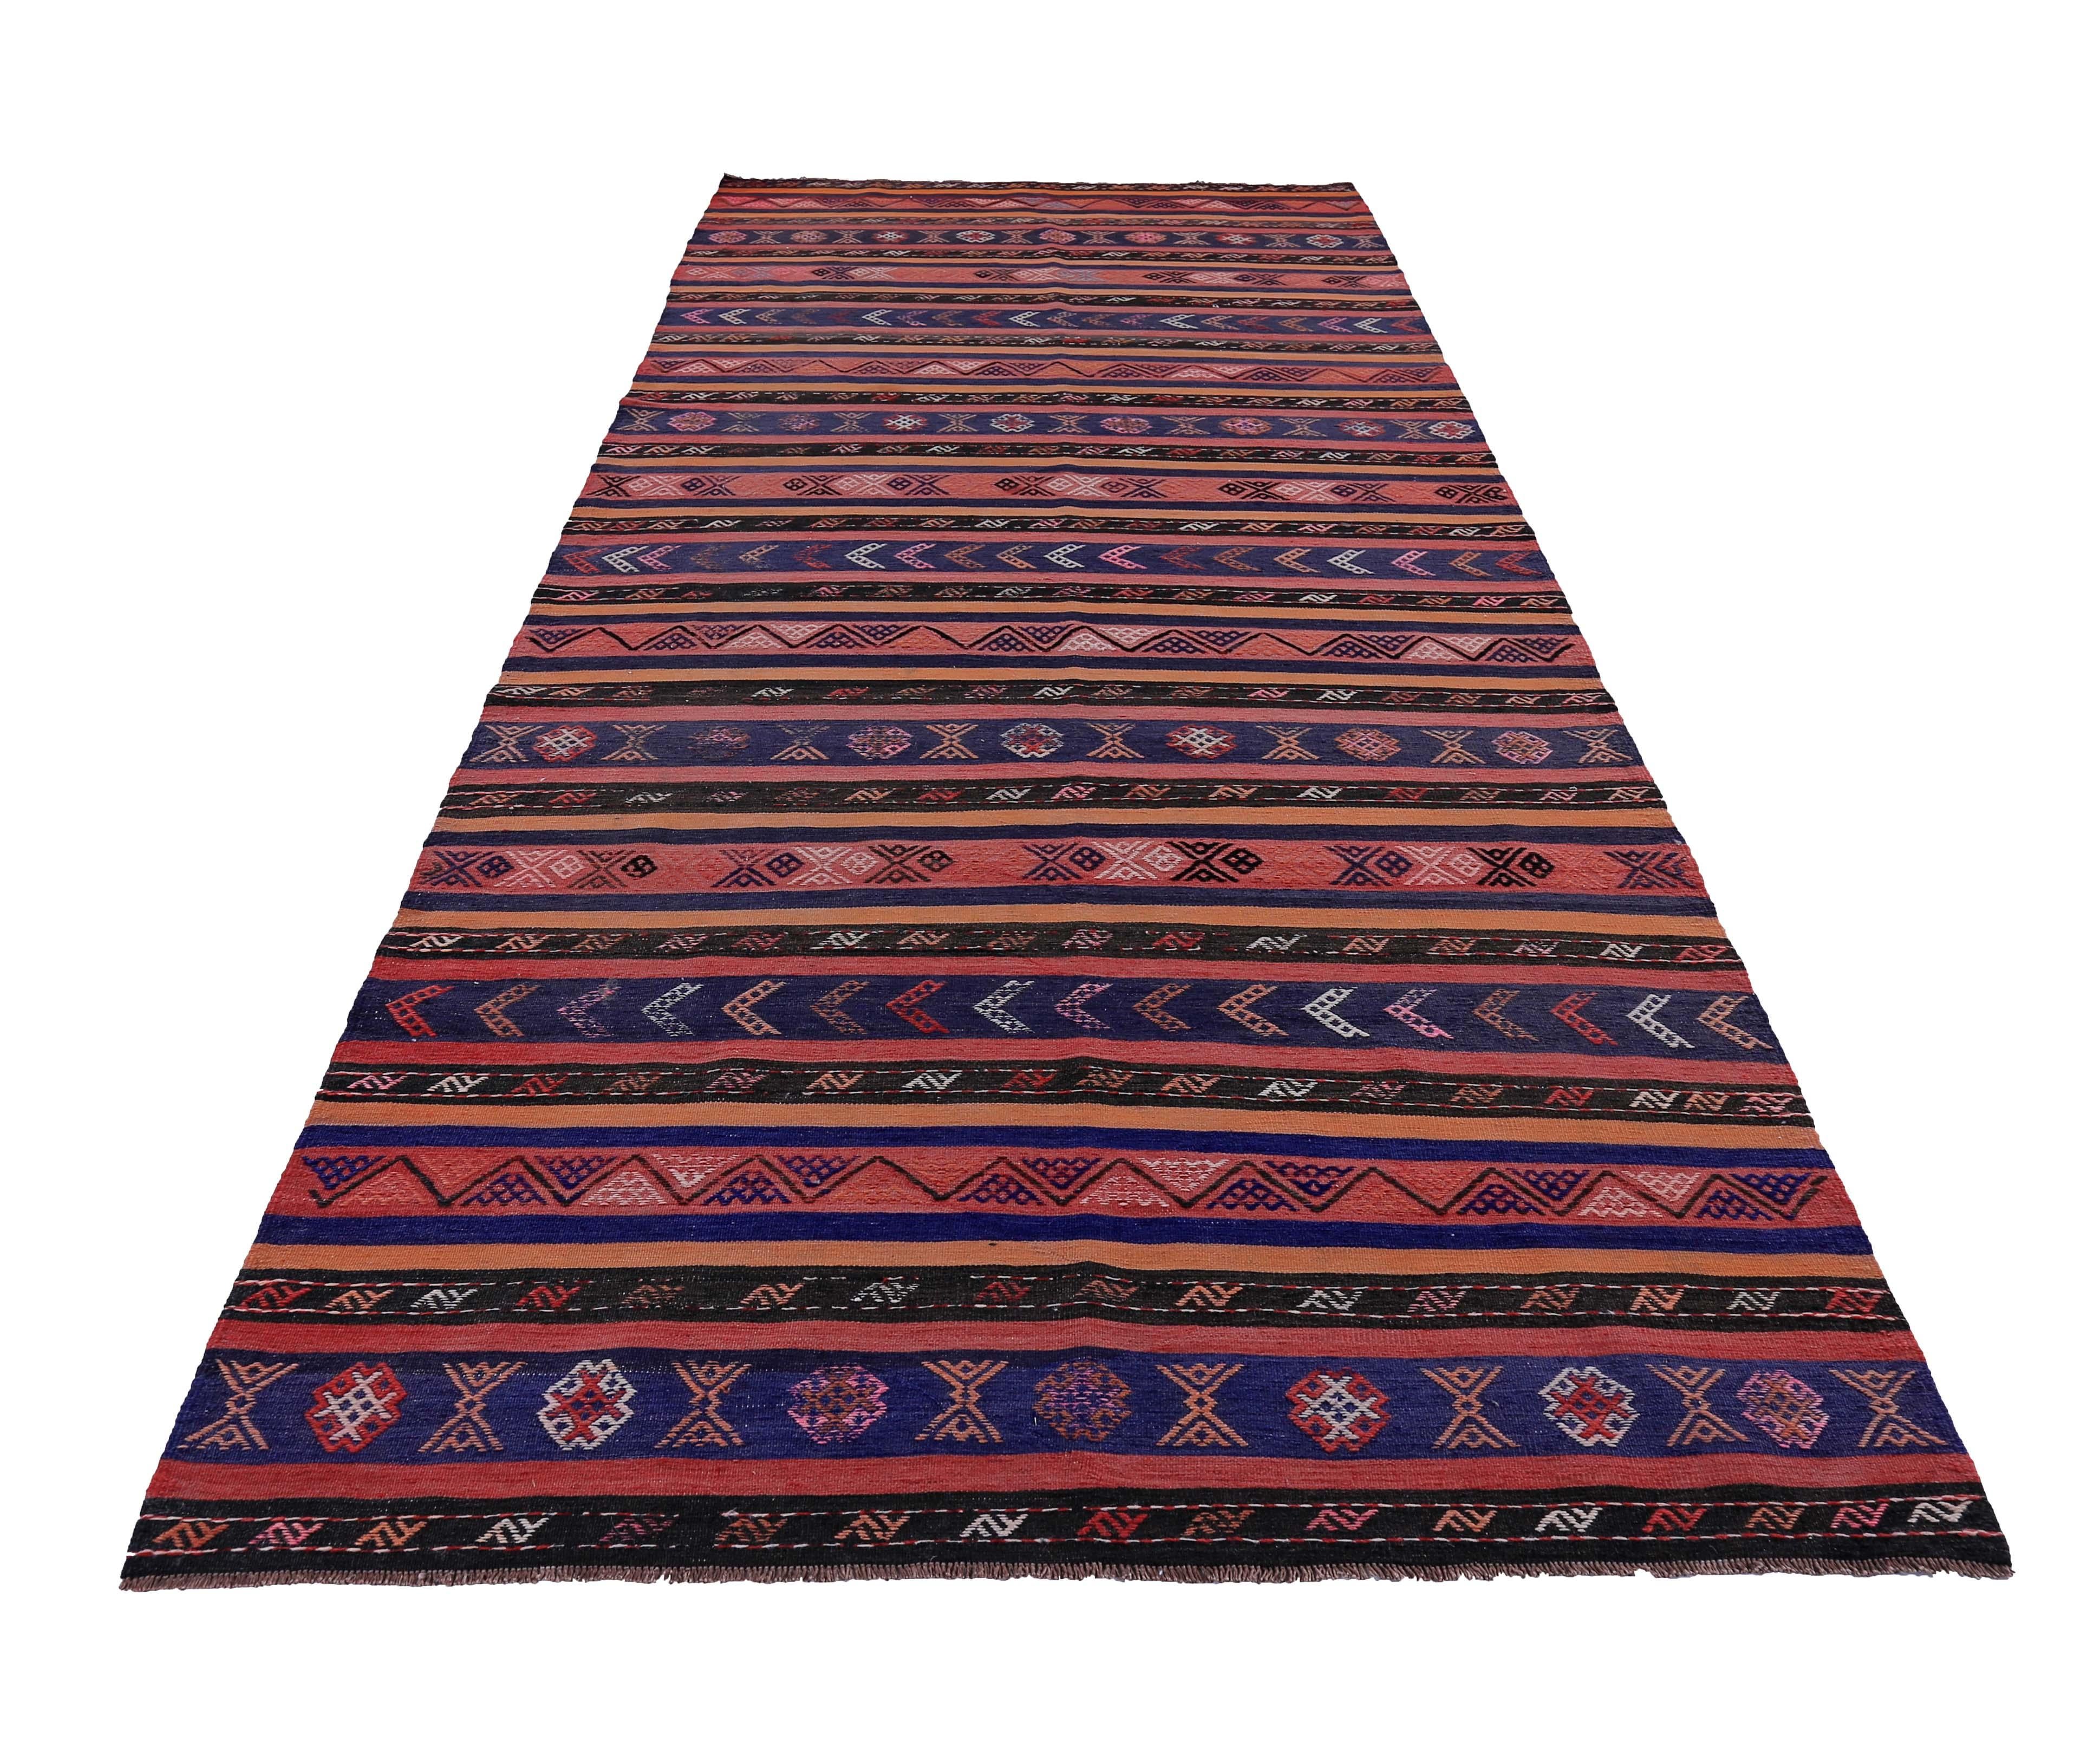 Turkish runner rug handwoven from the finest sheep’s wool and colored with all-natural vegetable dyes that are safe for humans and pets. It’s a traditional Kilim flat-weave design featuring blue, orange and pink tribal stripes. It’s a stunning piece